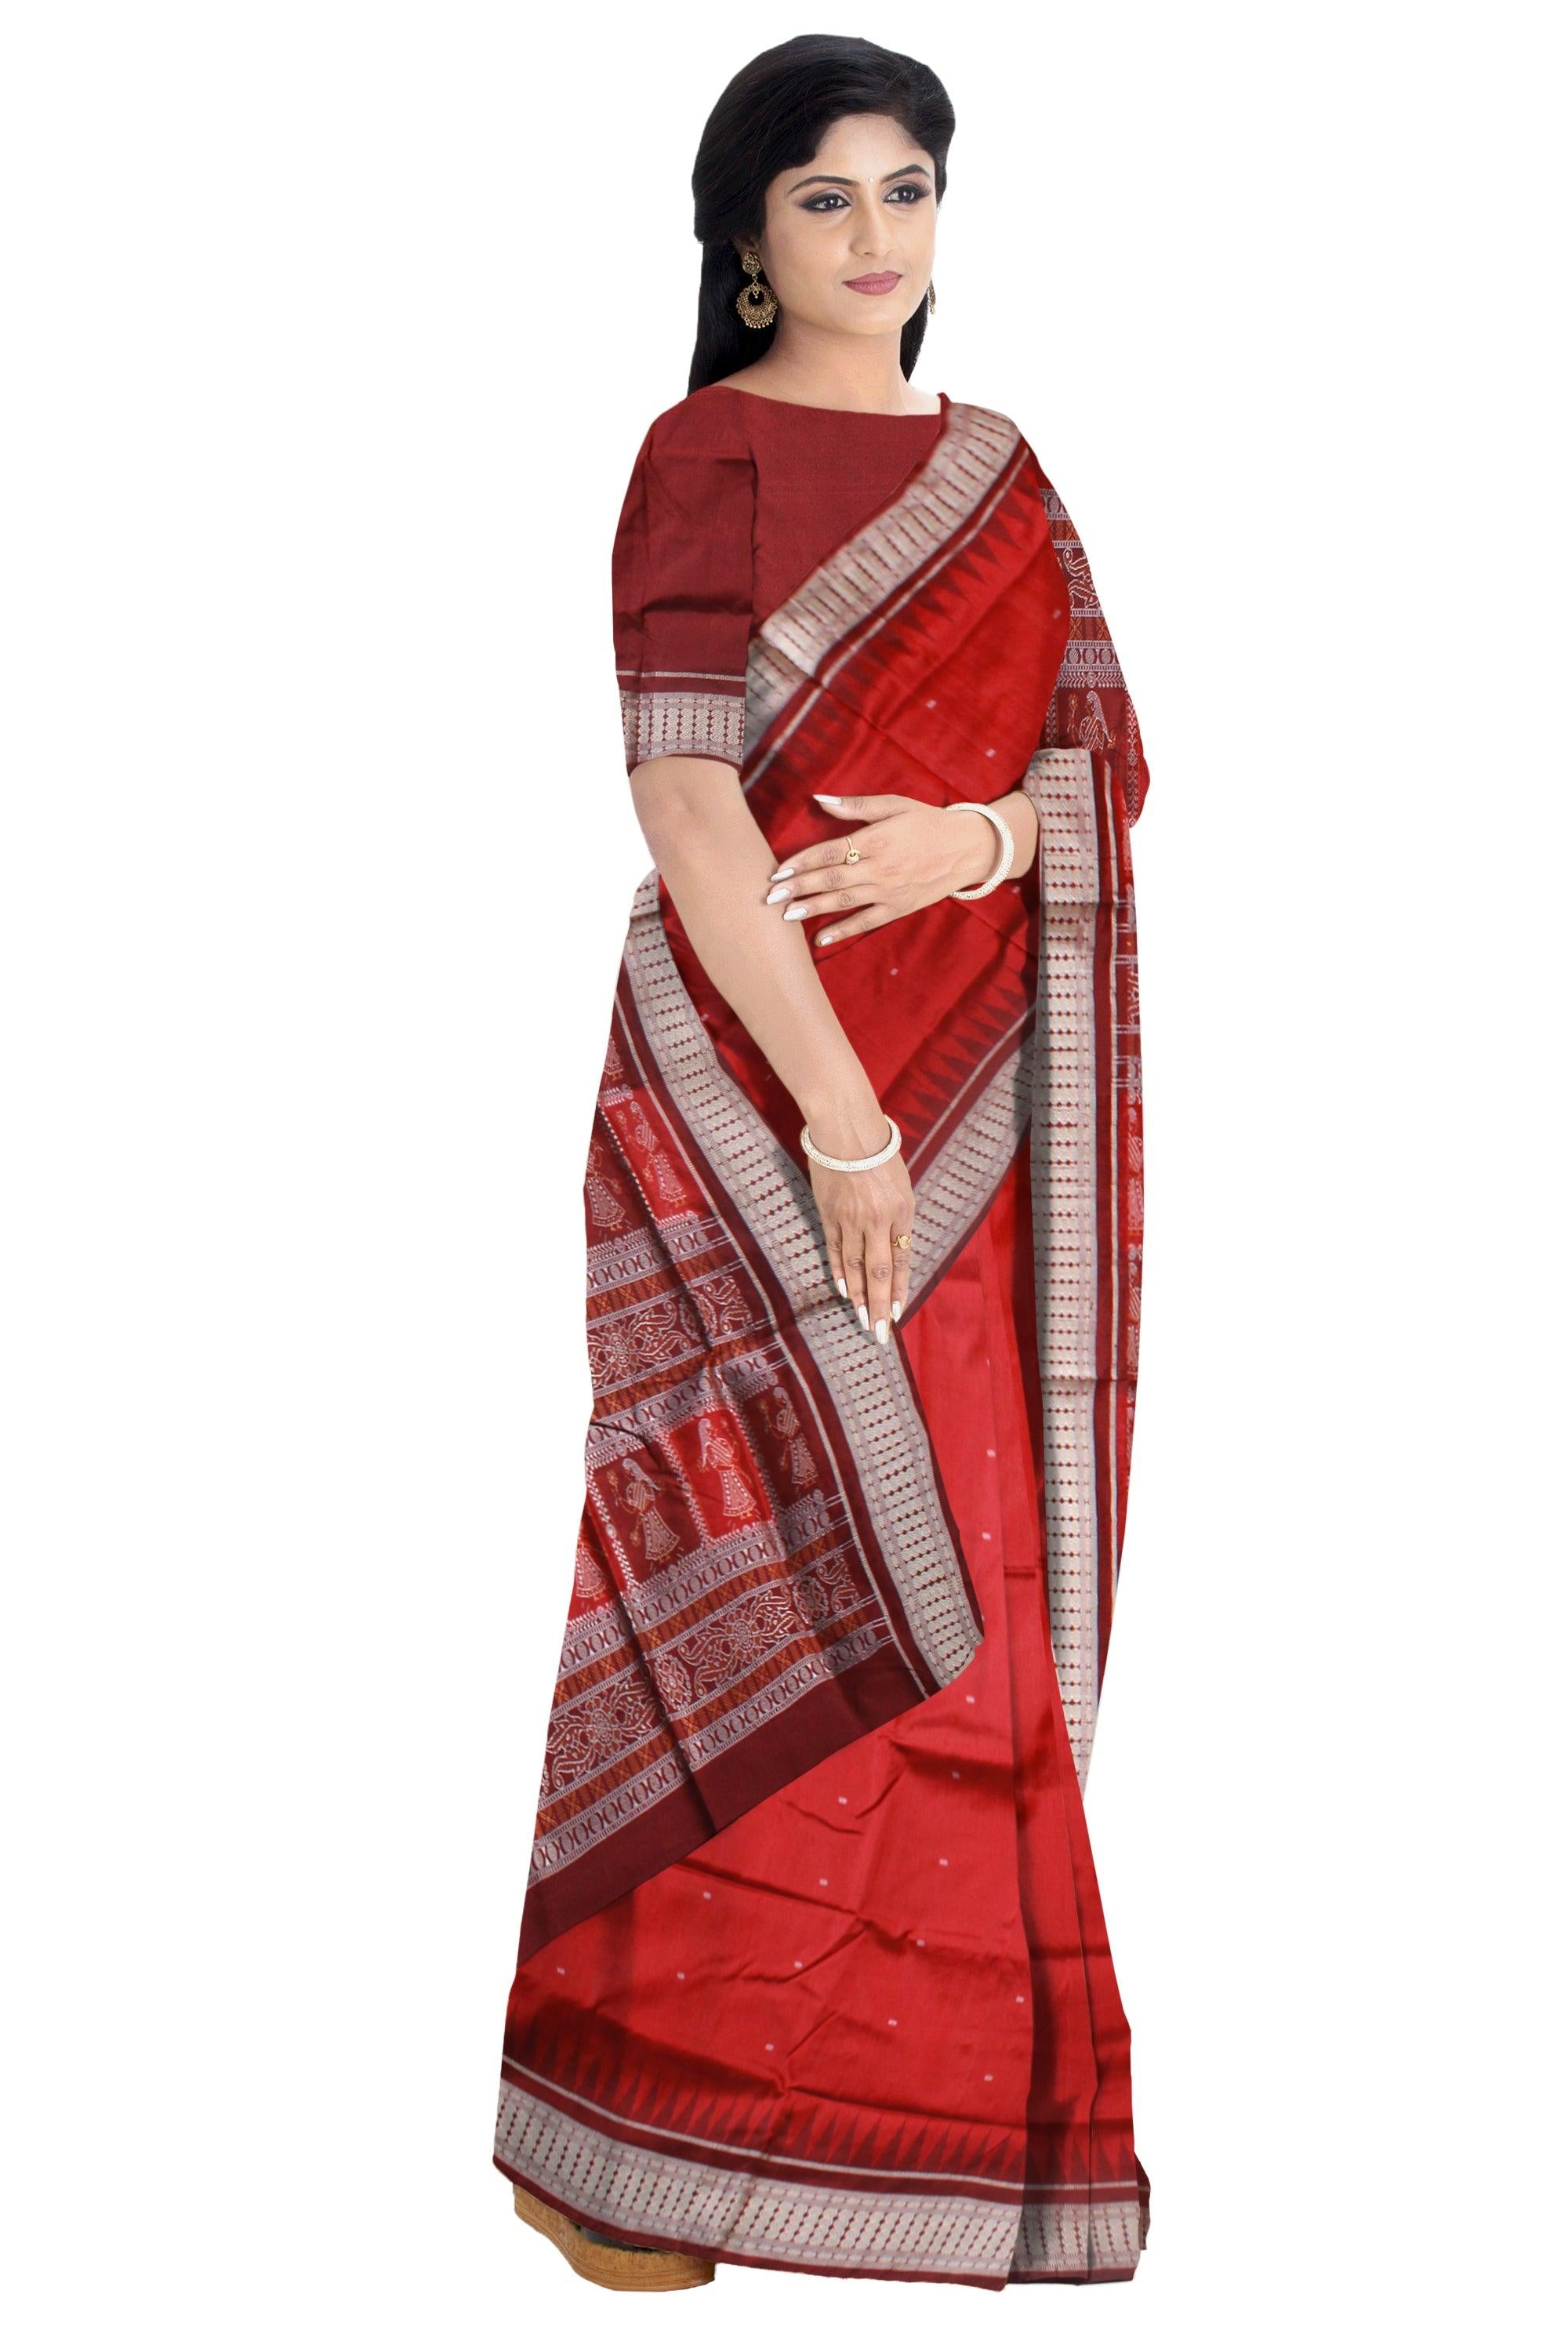 PALLU DOLL PRINT BOOTY PATTERN PATA SAREE IN RED AND MAROON COLOR BASE, WITH BLOUSE PIECE. - Koshali Arts & Crafts Enterprise